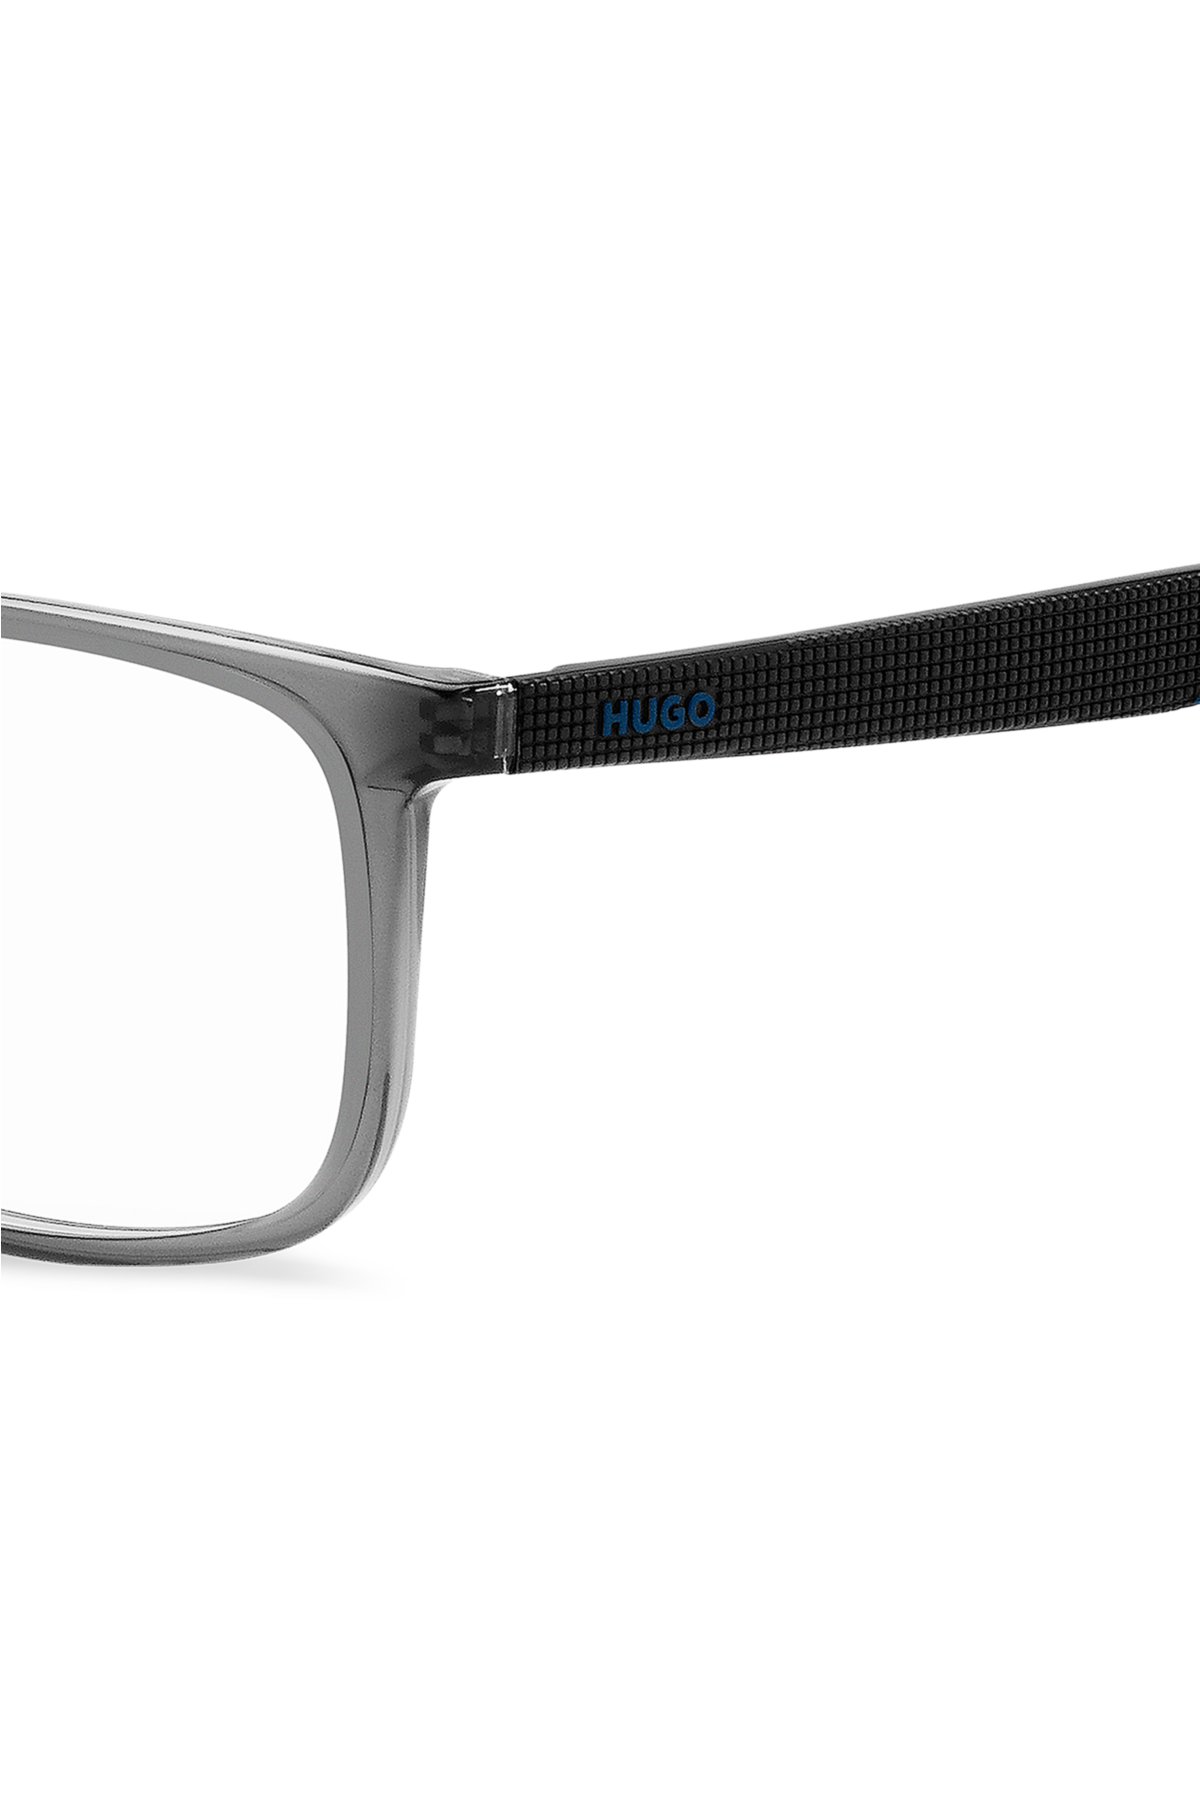 Two-tone optical frames with patterned temples, Grey